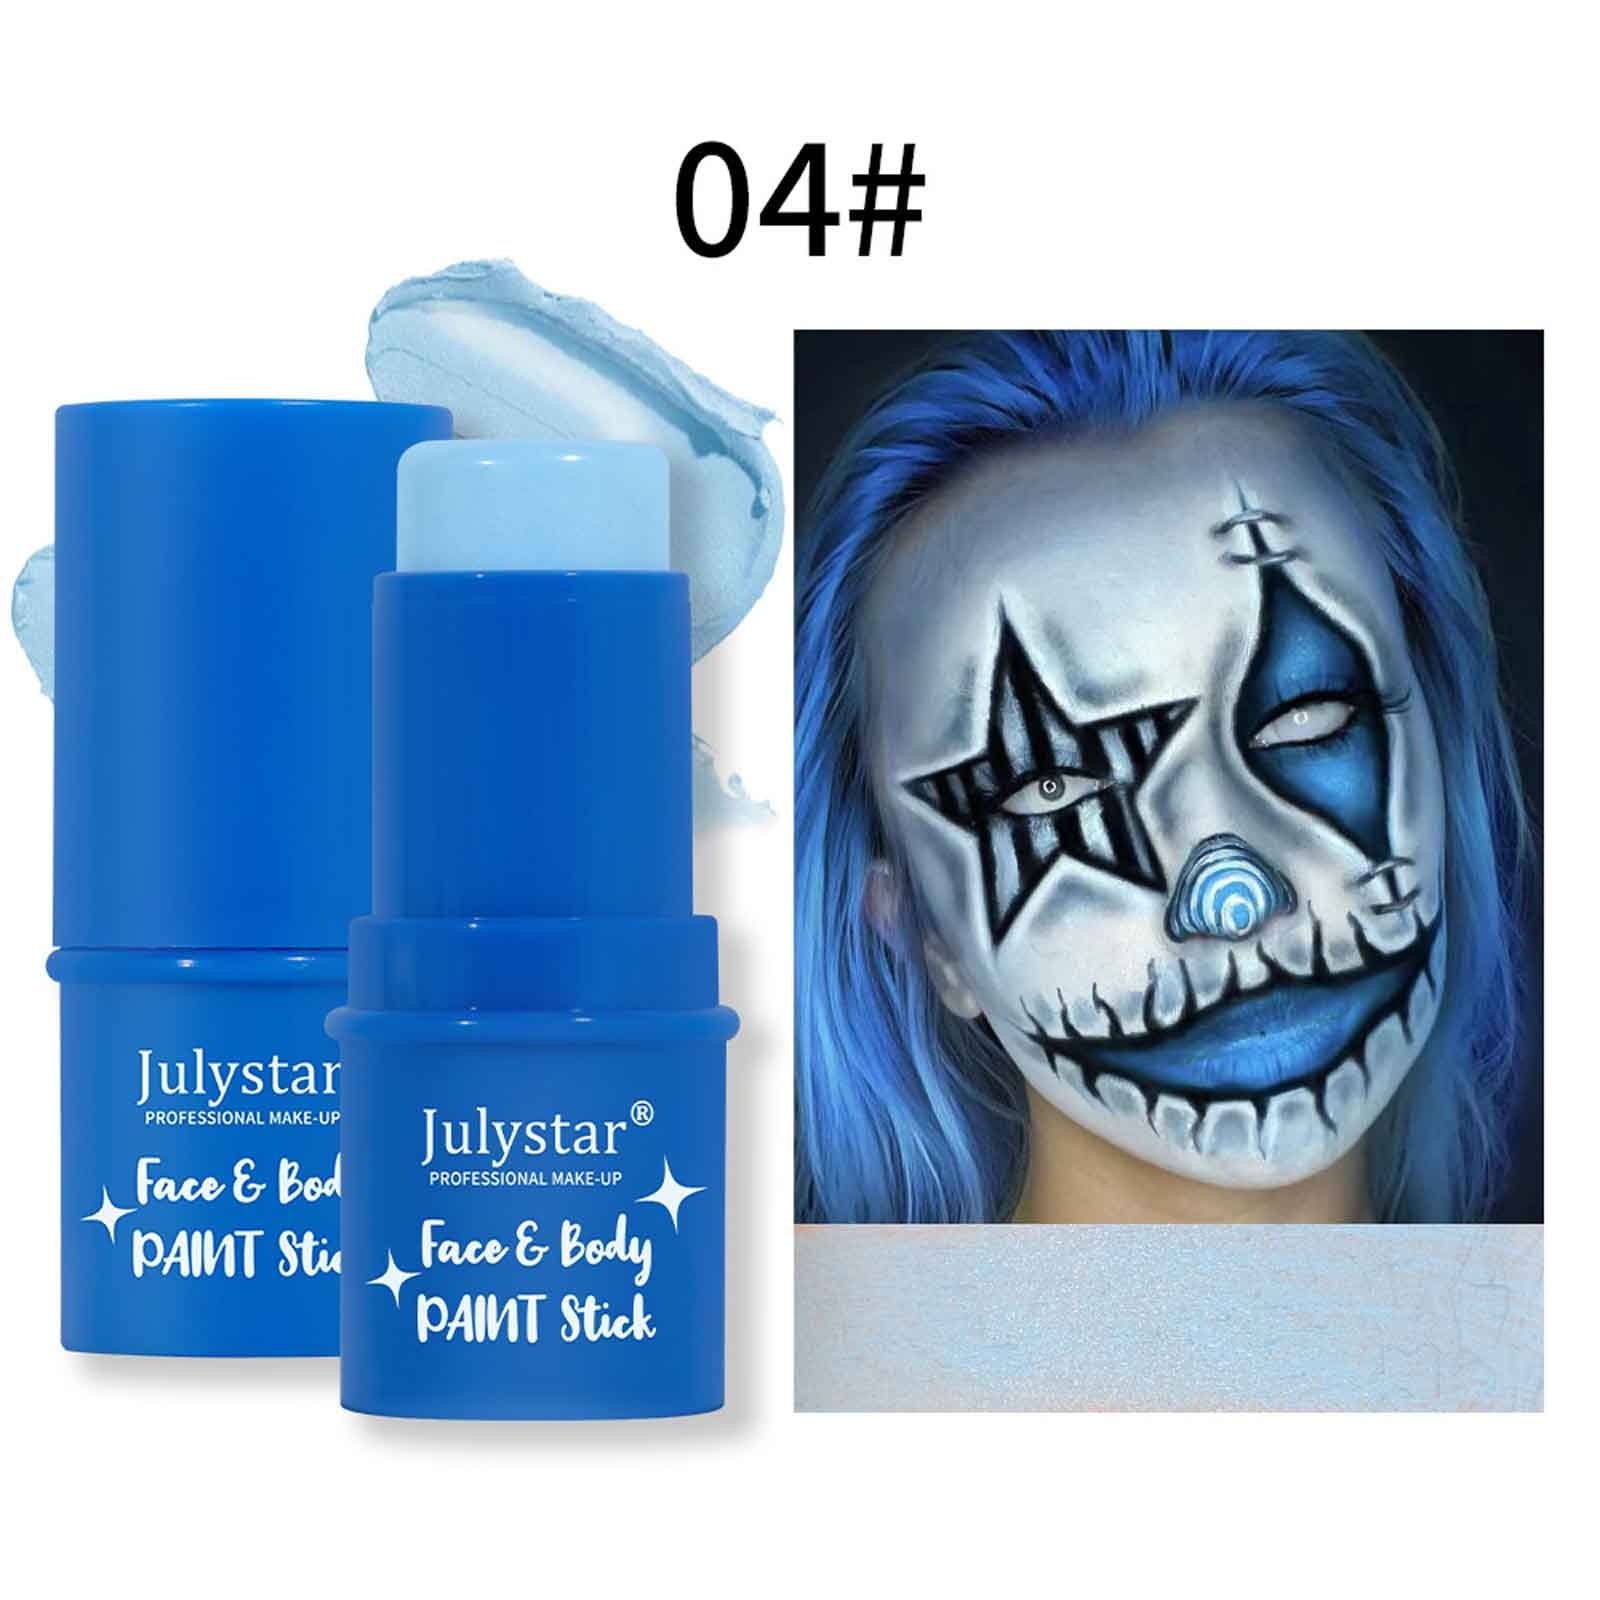 MEICOLY Clown White Face Paint Stick(1.06 Oz),Cream Body Paint Stick for  Adults and Kids,White Eye Black Stick for Sports,Joker Zombie Vampire